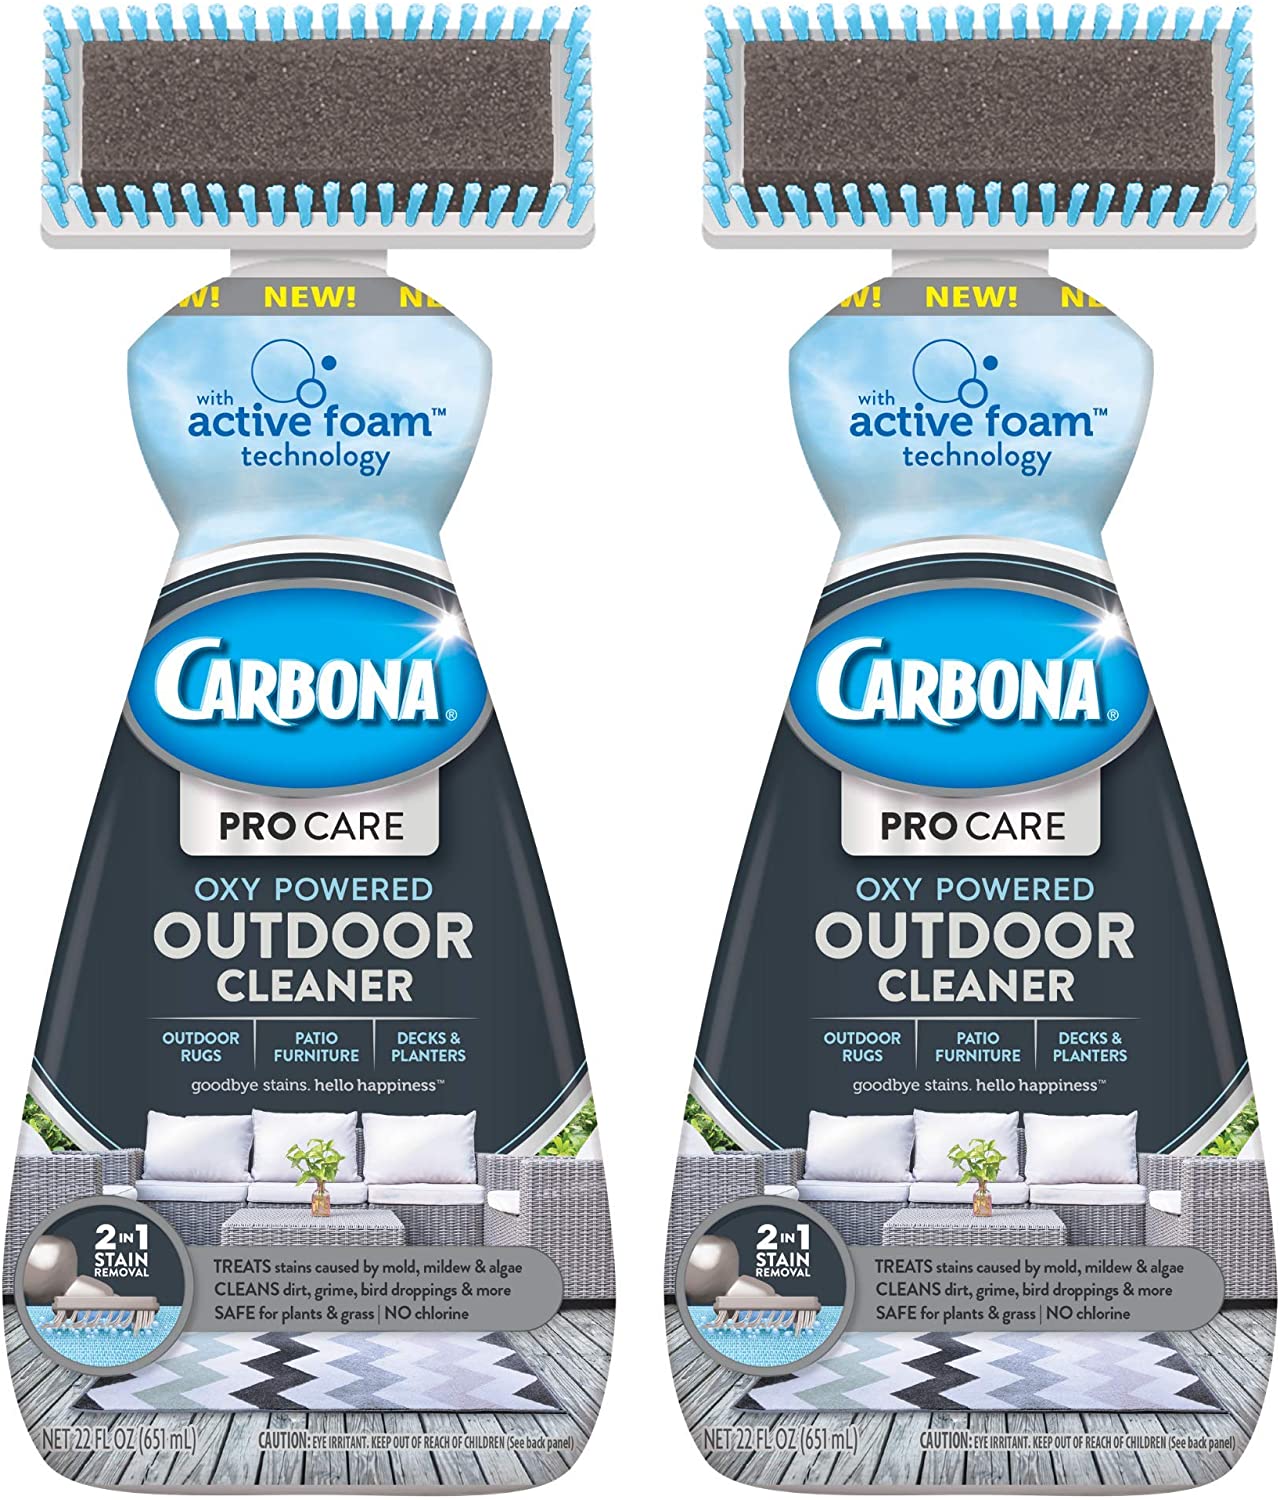 Carbona Pro Care 2-in-1 Oxy Powered Outdoor Cleaner